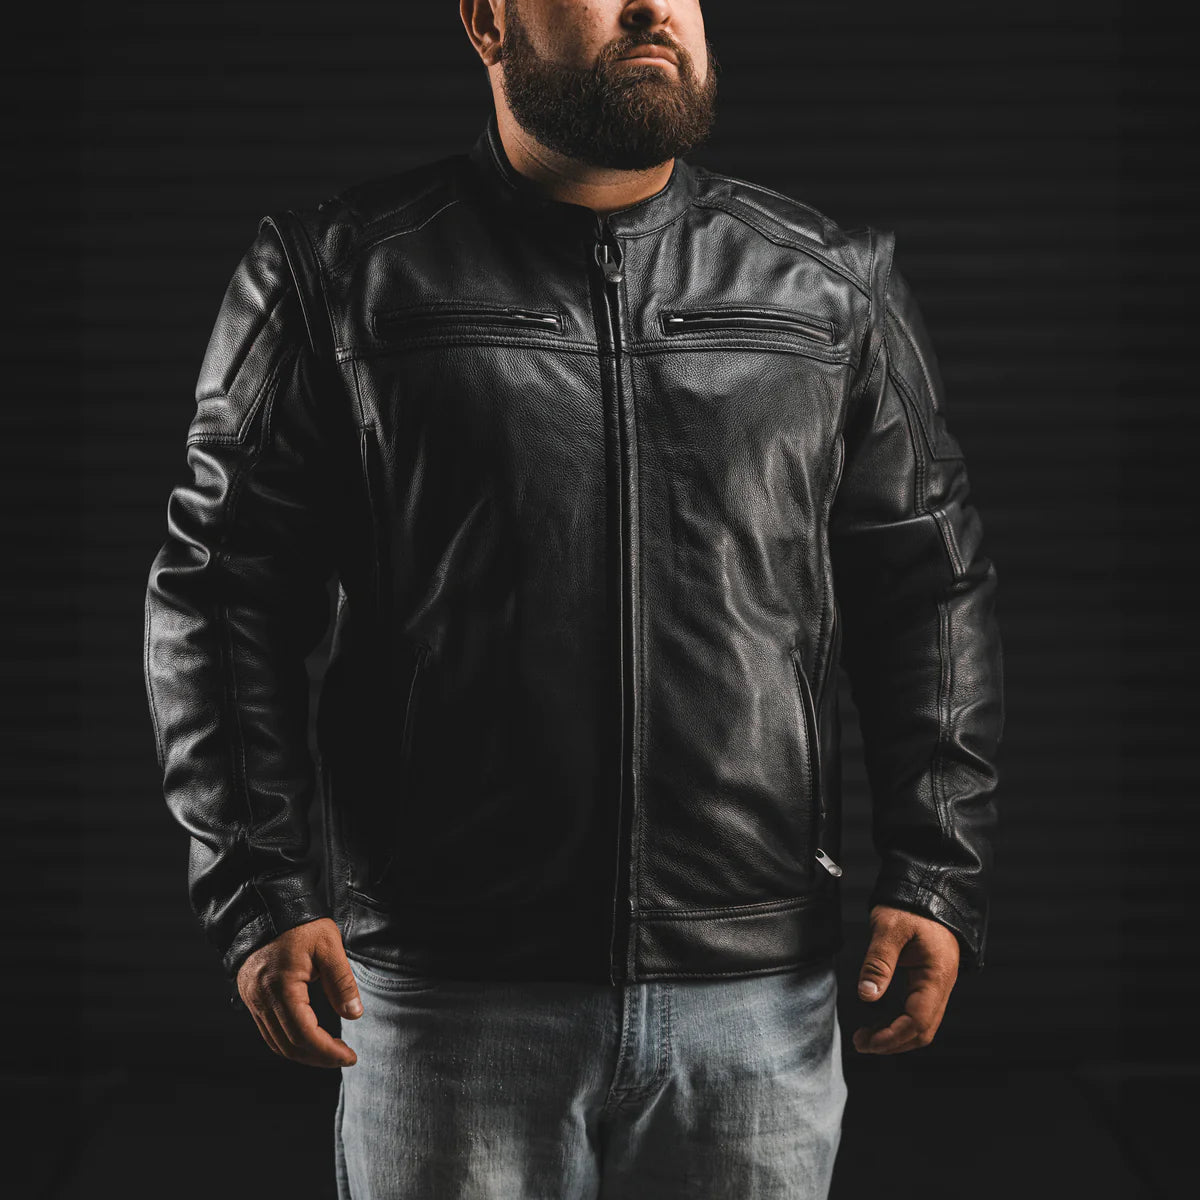  "Image of a man wearing the CE Rated Chaos motorcycle jacket in Black Diamond Cowhide, showcasing the sleek fit and style."